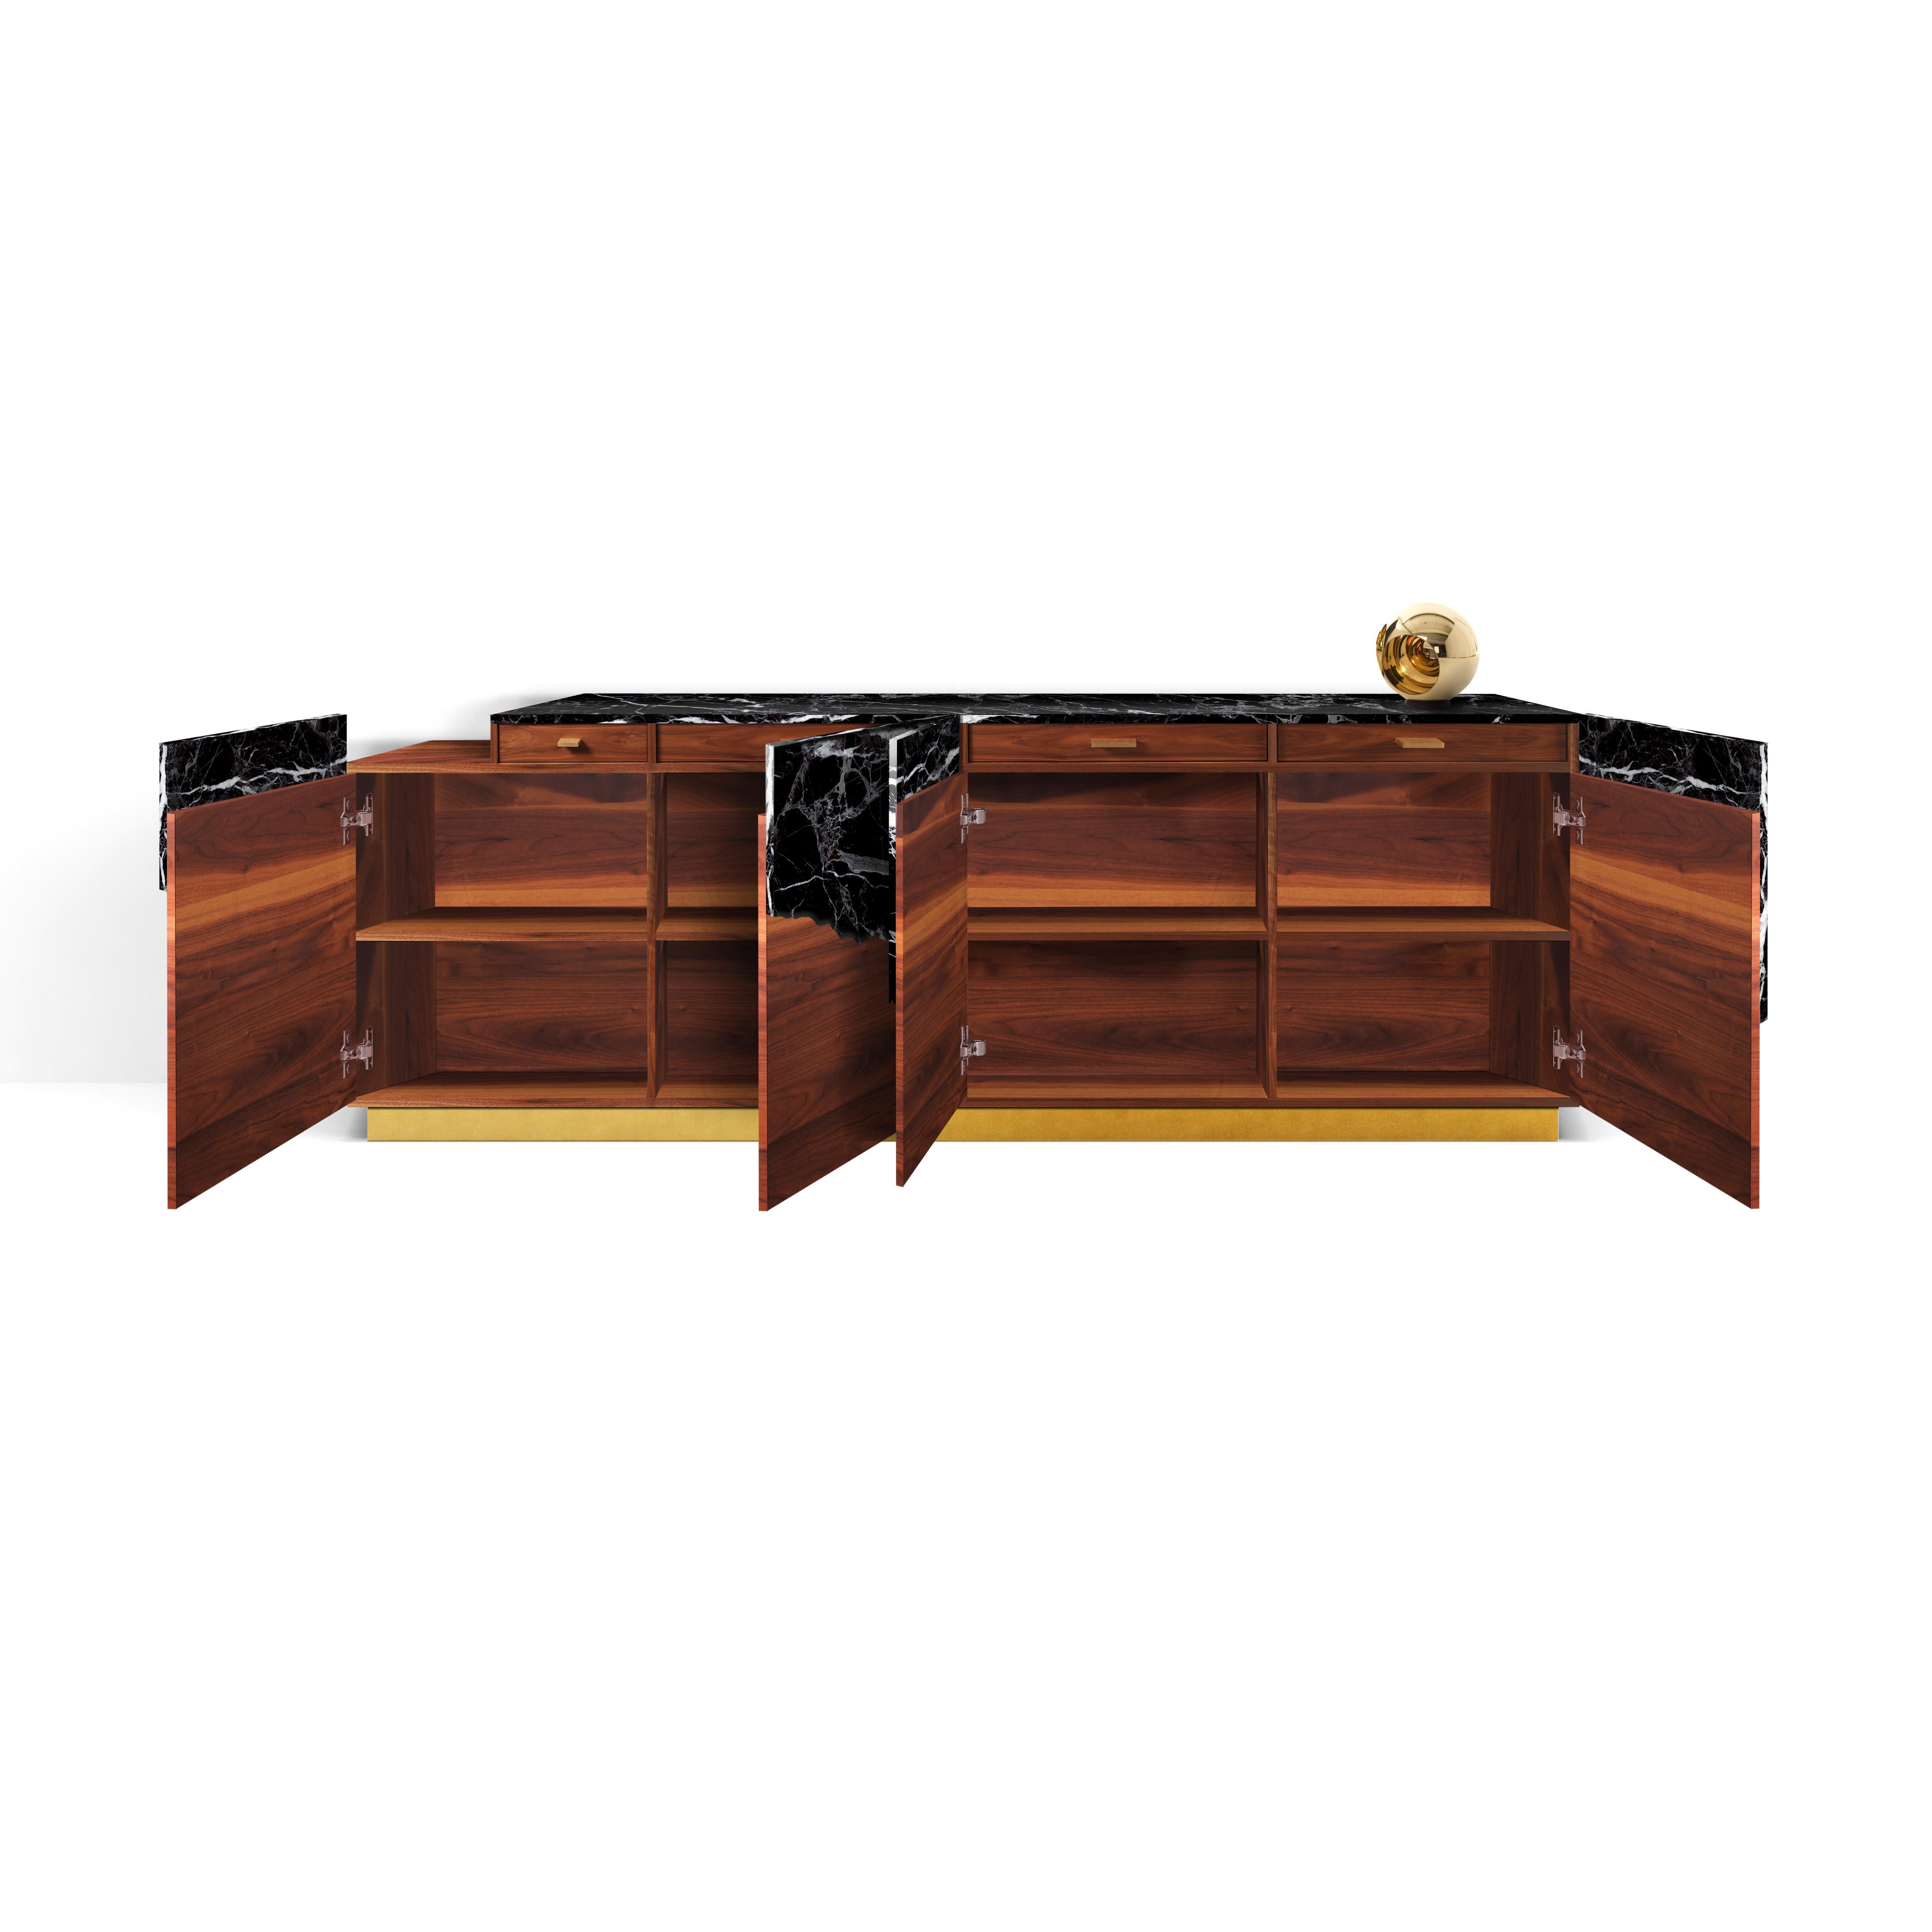 Directly inspired by natural beauty of Iceland. Made of live edge black marble, American walnut veneer and brass.
Contemporary, luxurious and impeccably crafted, this credenza makes a beautiful home investment. The design works a clean-lined body